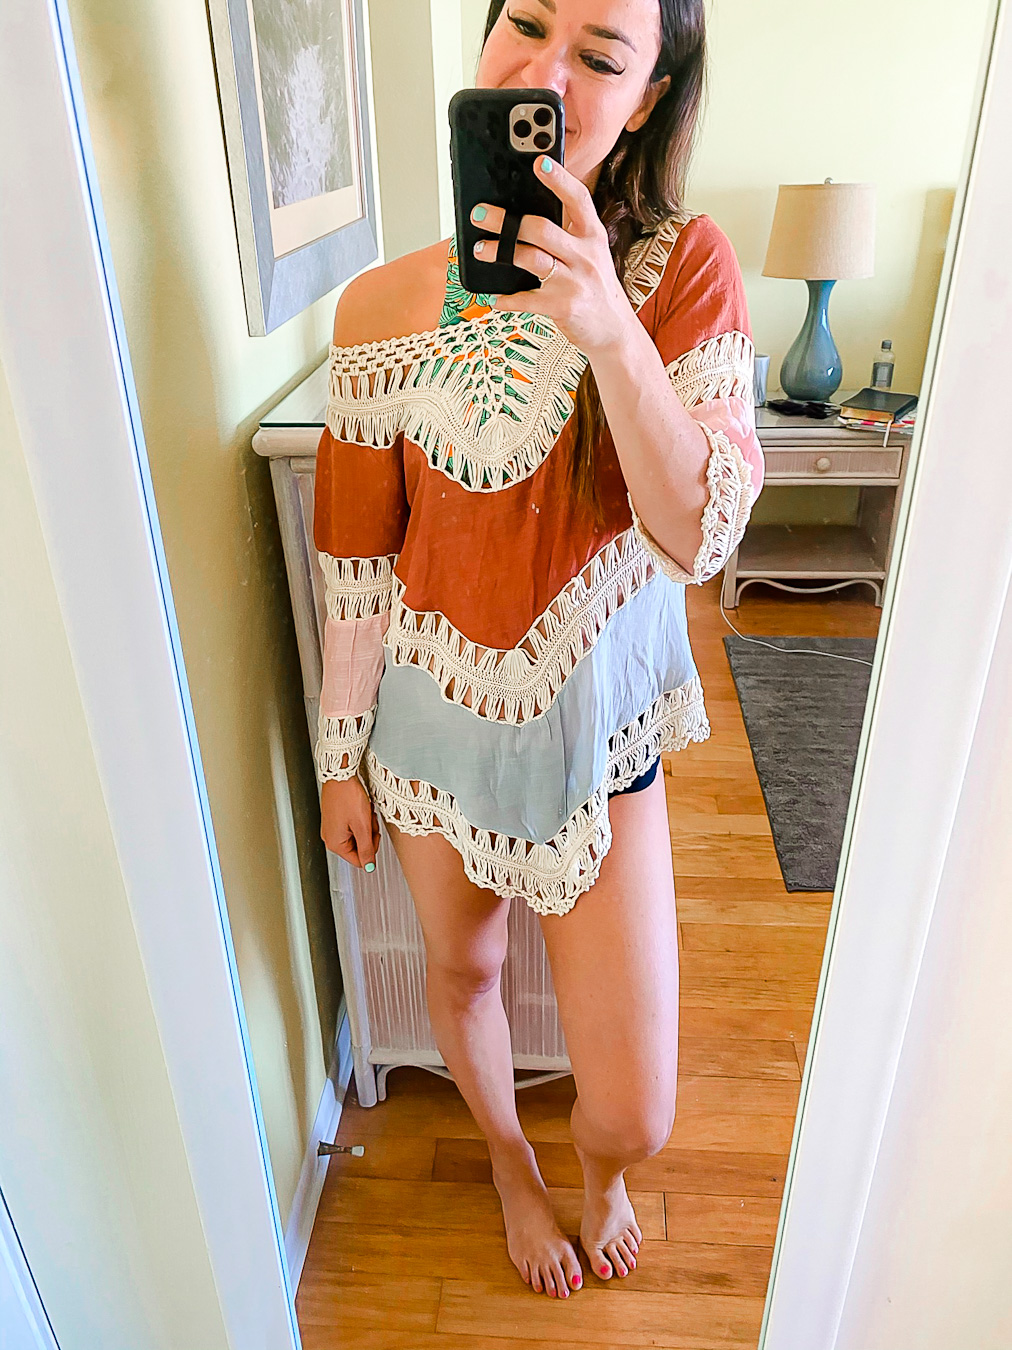 Life + Style blogger, My Life Well Loved, shares a Shopping Guide: The Best Memorial Day Sales To Shop! Click here to see what they are!